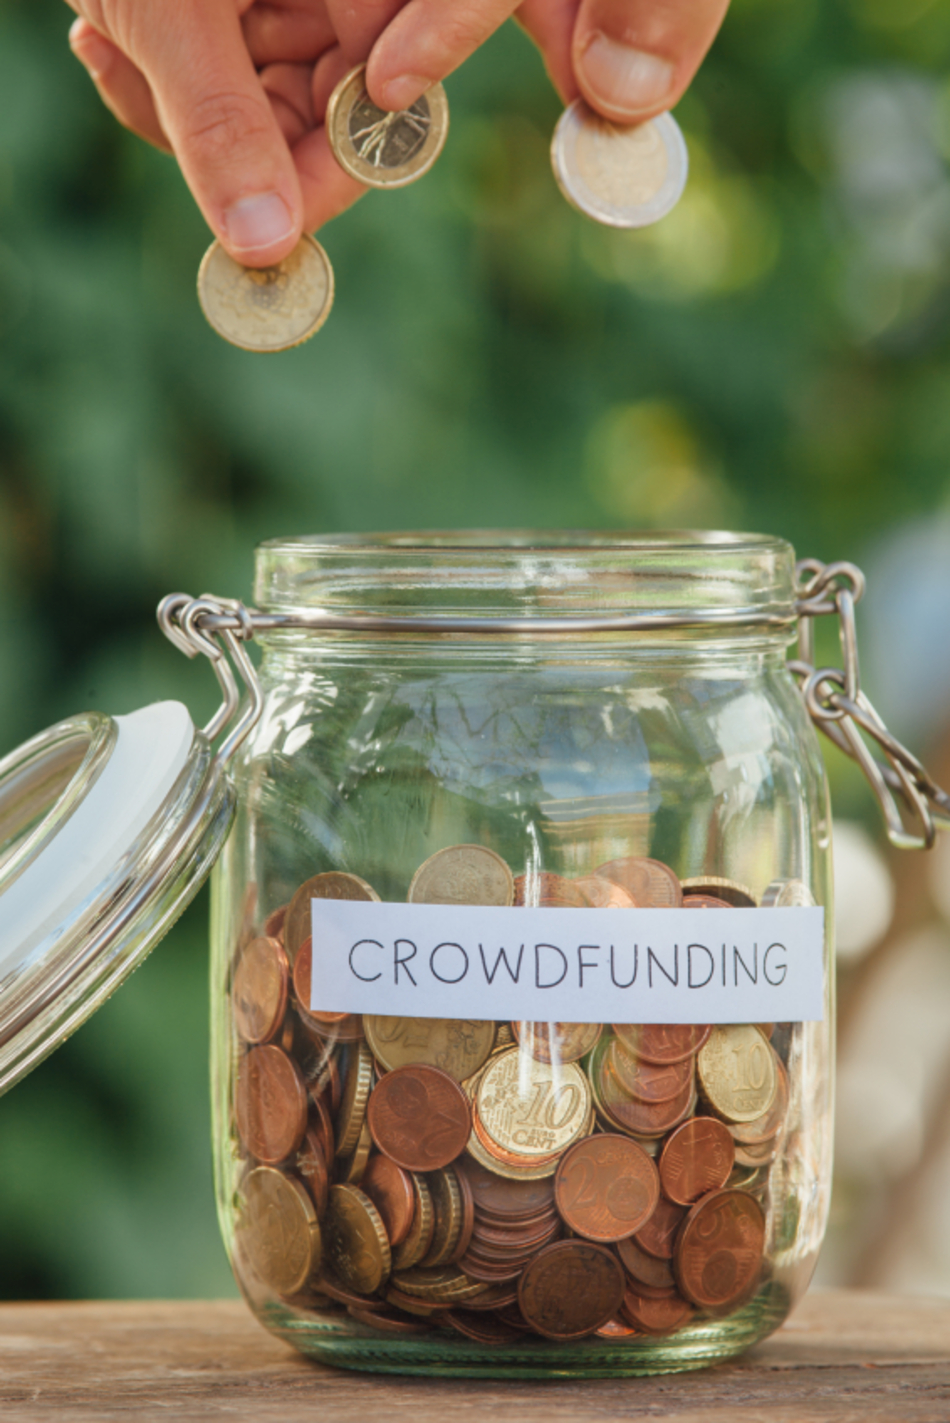 Easy Money? A Scientist’s Experience with Crowdfunding